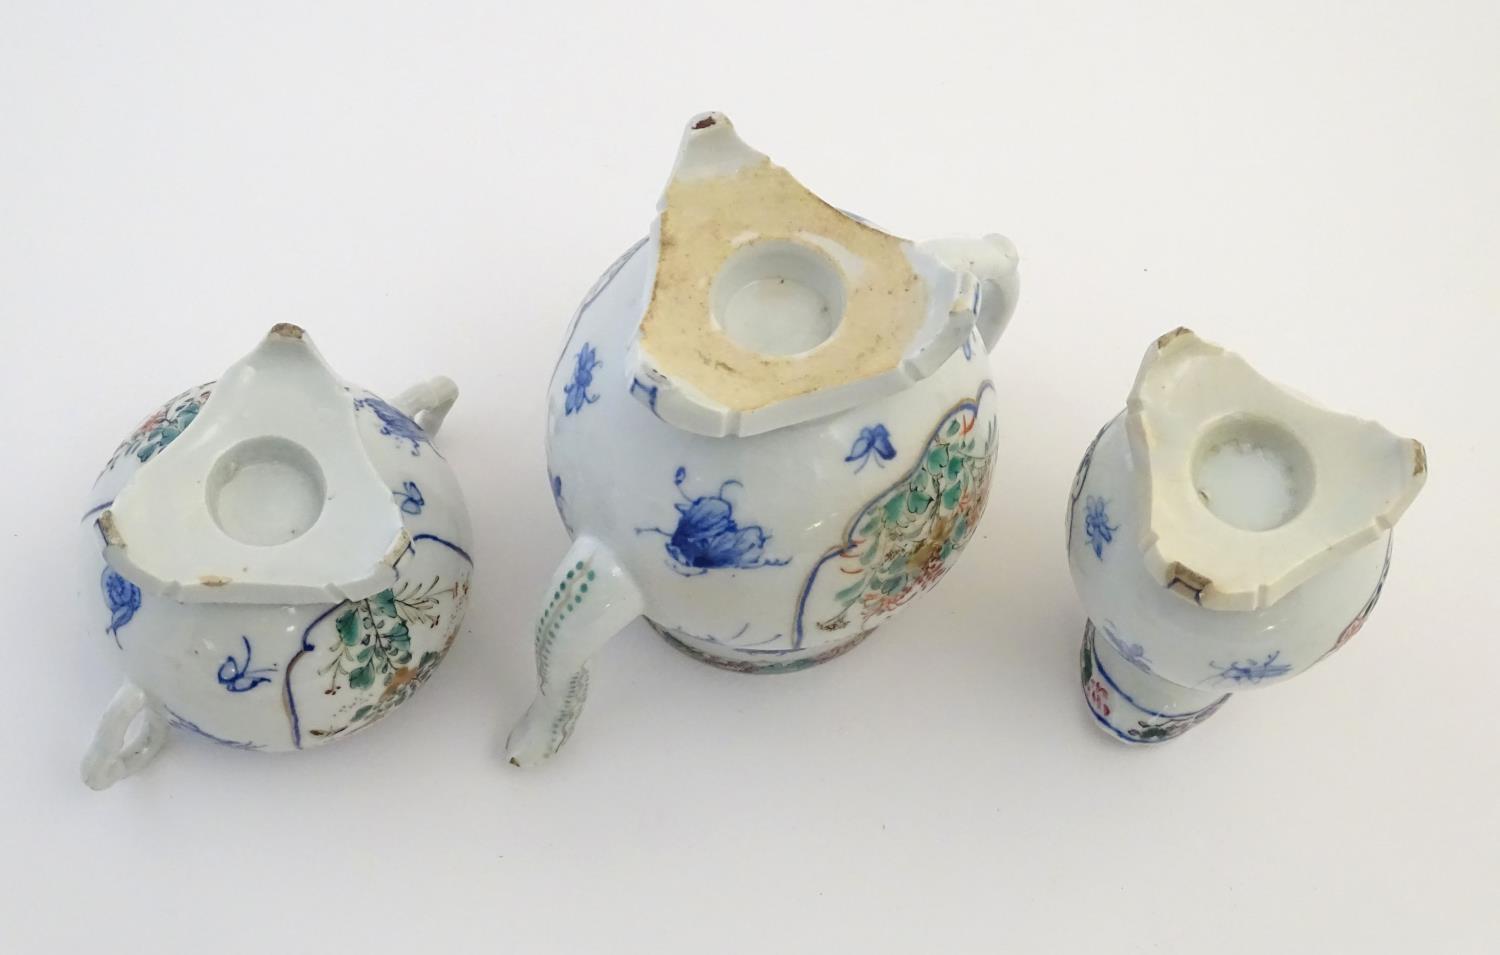 A Japanese teapot, twin handled sugar bowl and milk jug decorated with hand painted insects and - Image 2 of 8